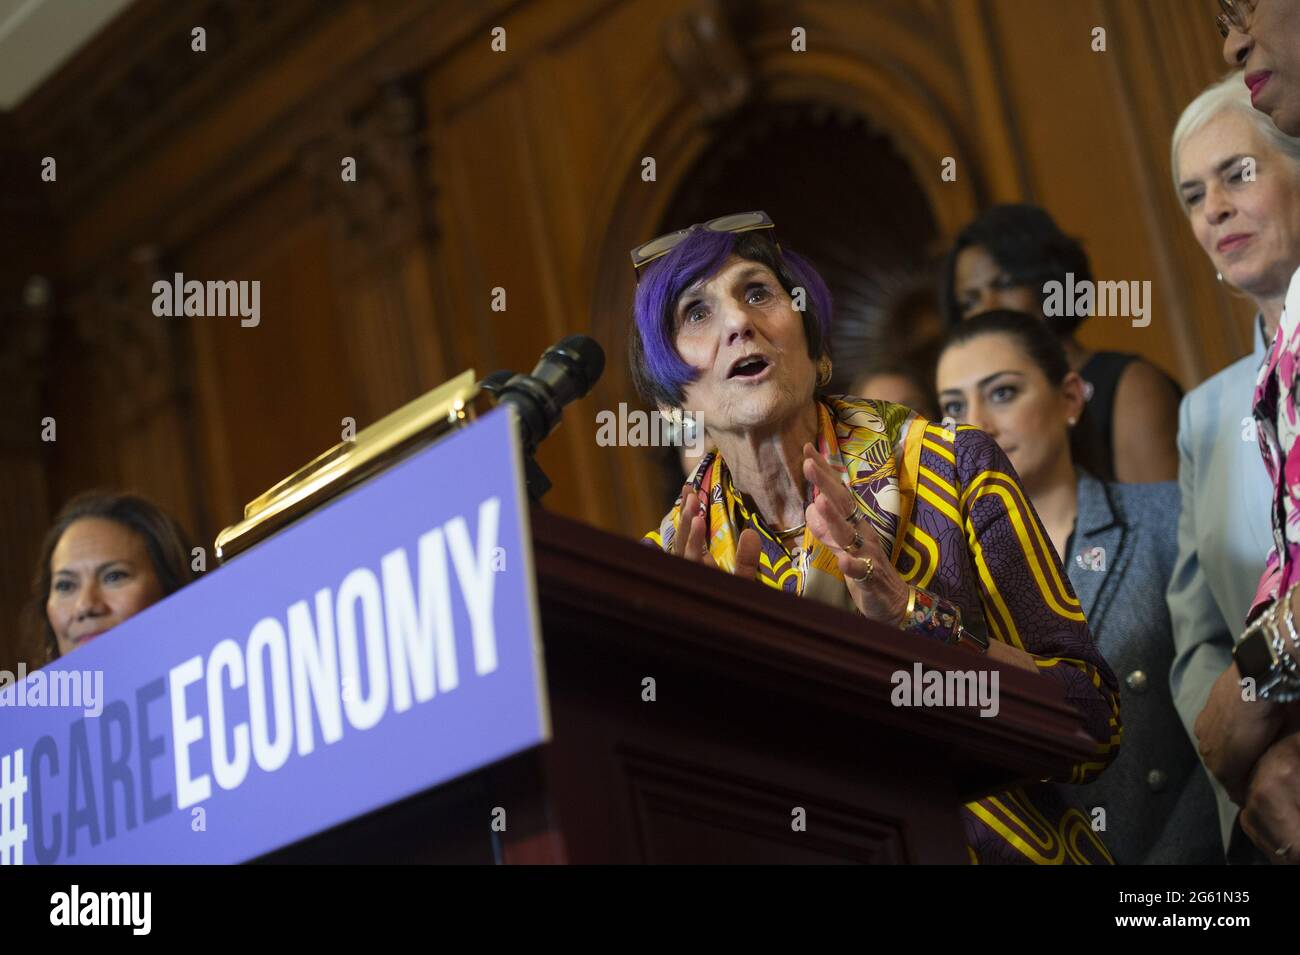 Washington, United States. 01st July, 2021. House Appropriations Committee Chairwoman Rosa DeLauro, D-CT, and other members of the Democratic Women's Caucus hold a news conference to discuss the care economy, comprising public services for childcare, early childhood education, as well as elder care, at the US Capitol in Washington DC, on Thursday, July 1, 2021. Photo by Bonnie Cash/UPI Credit: UPI/Alamy Live News Stock Photo